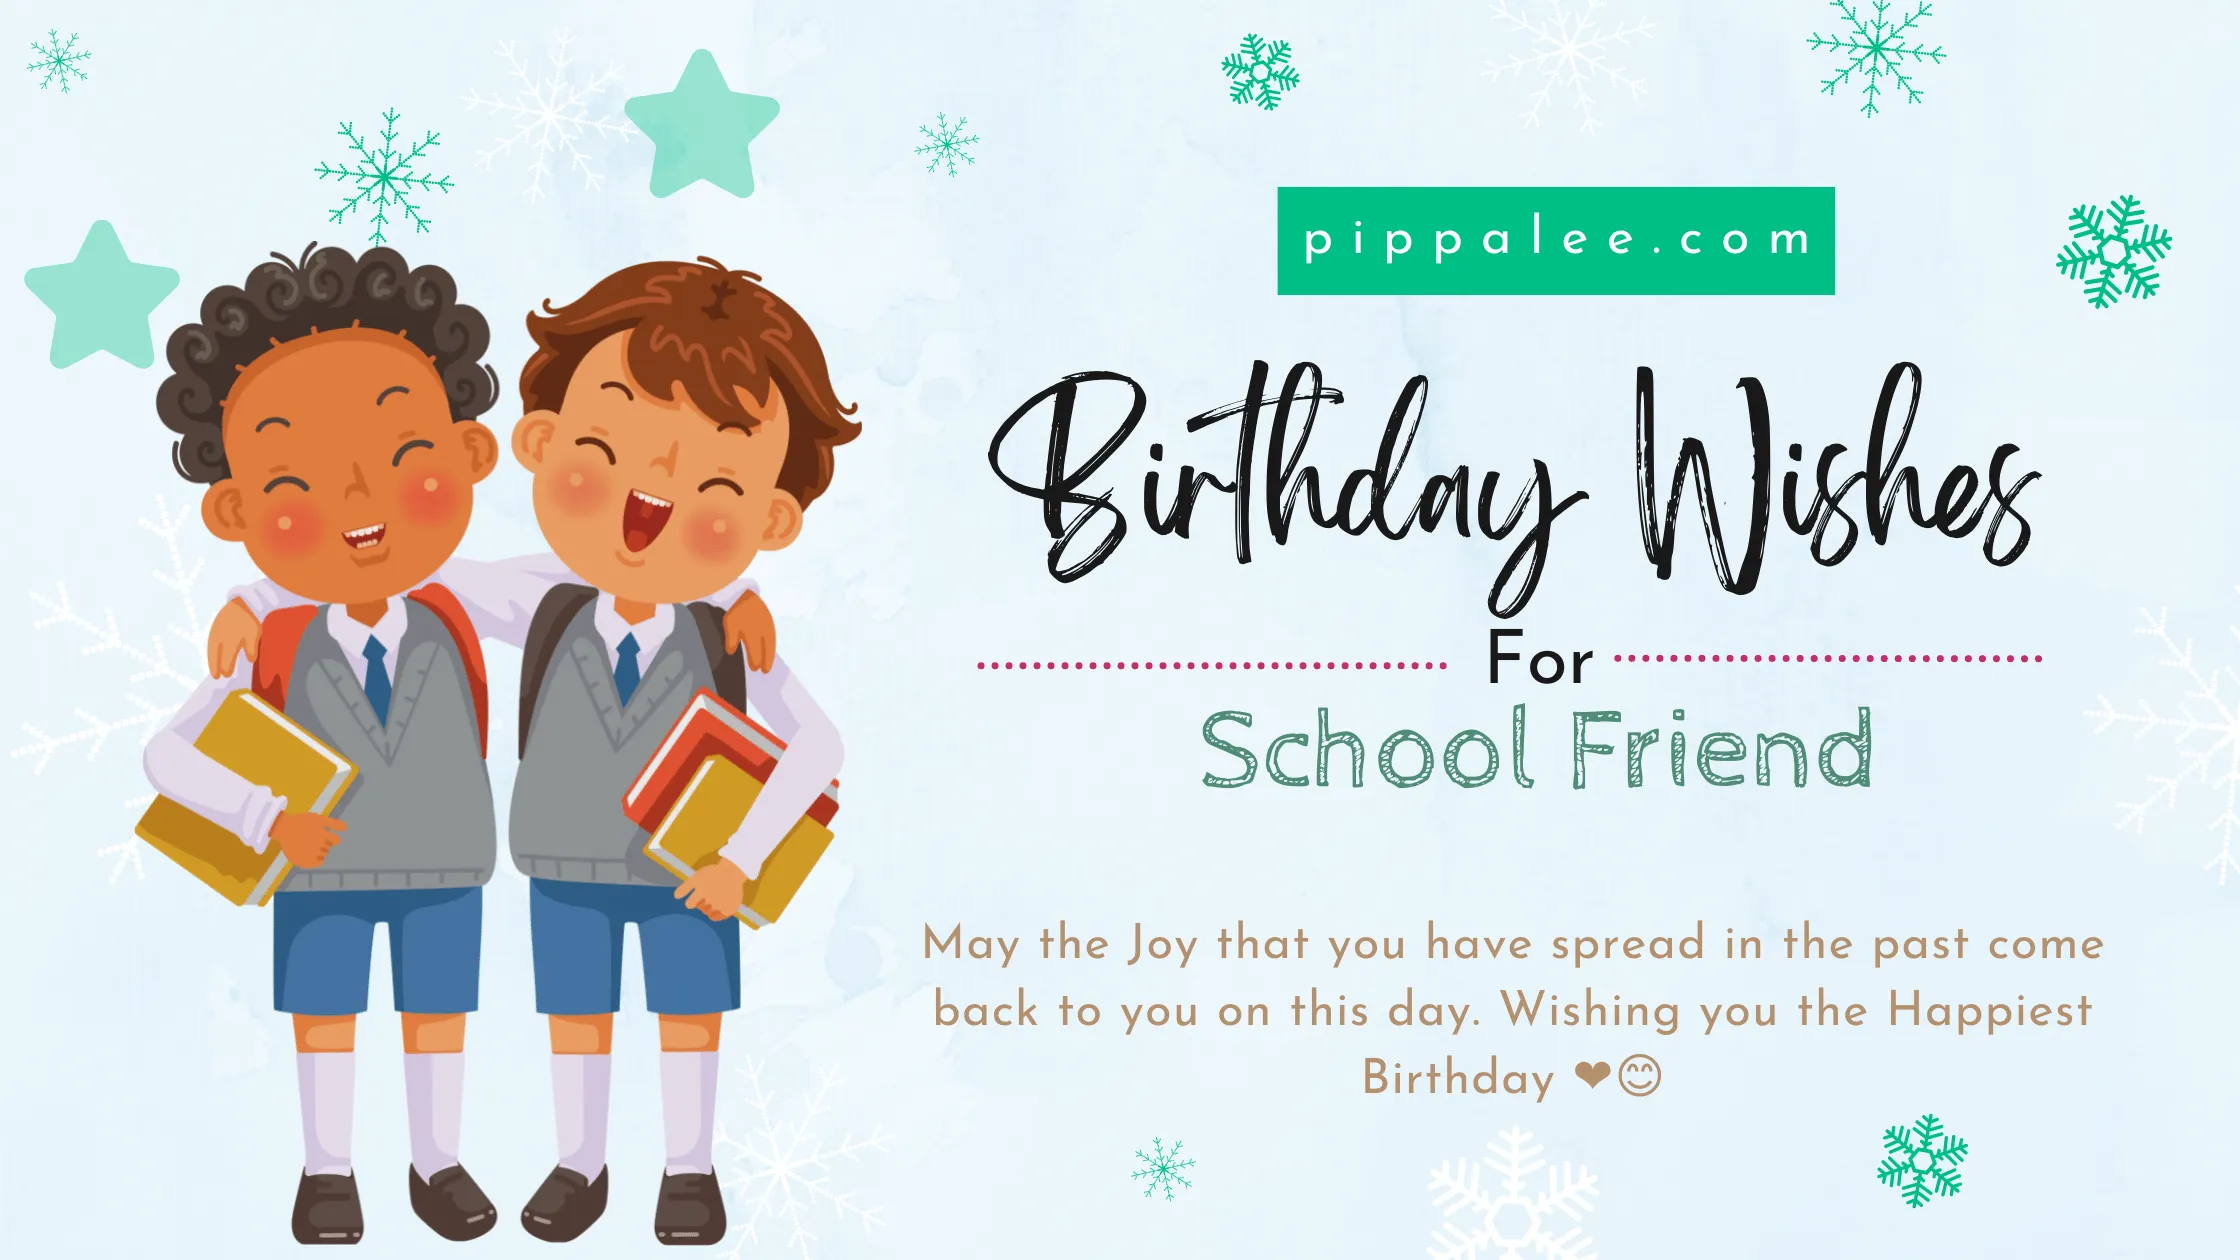 Birthday Wishes For School Friend - Wishes & Messages